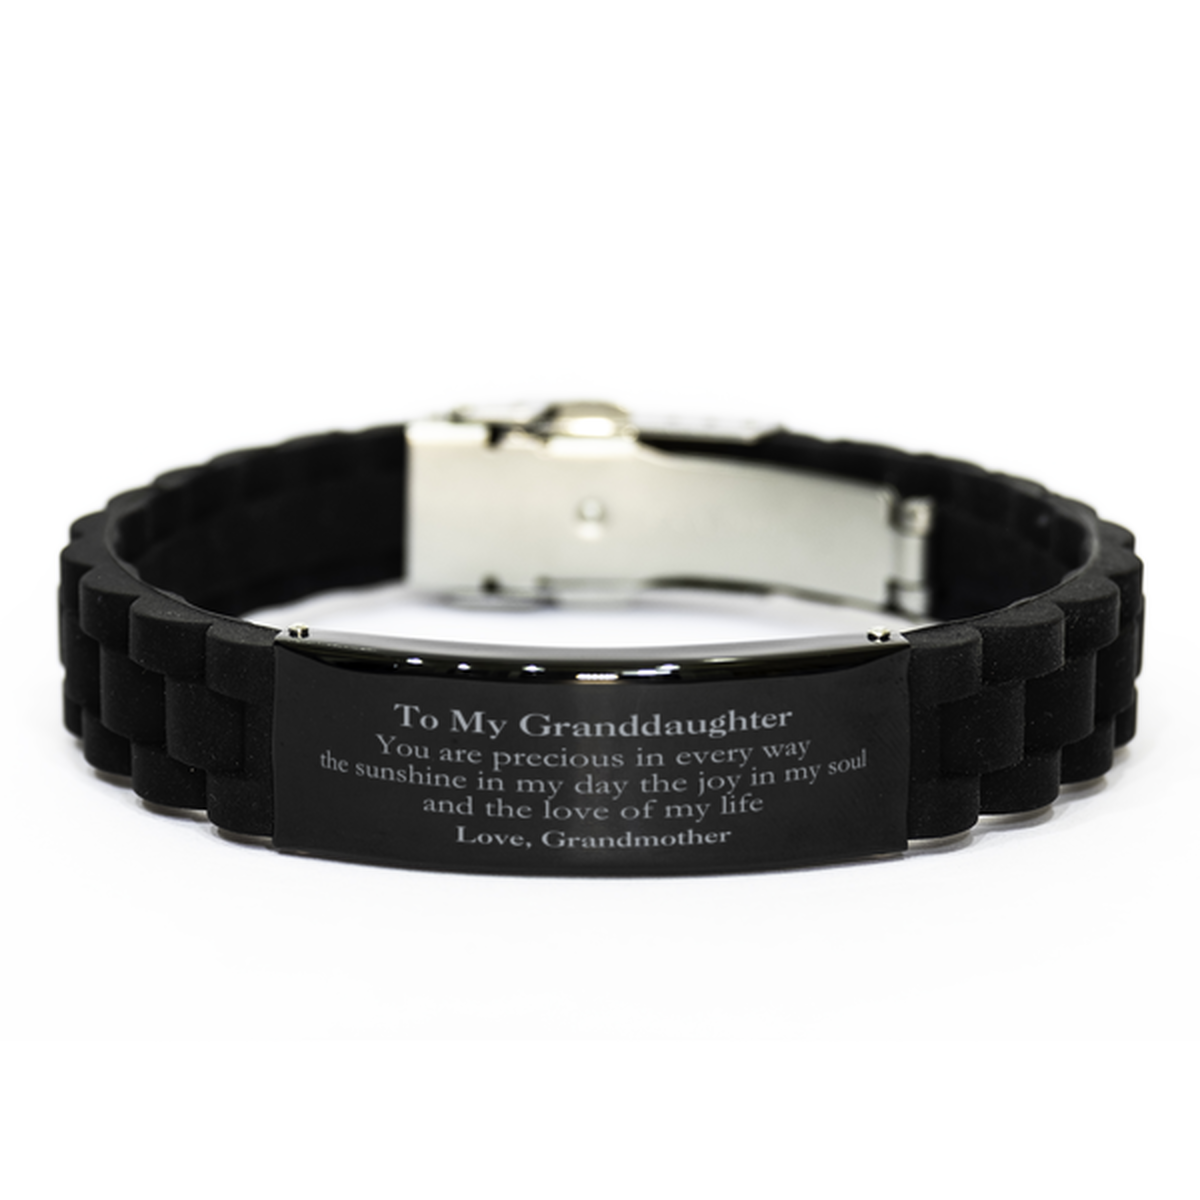 Graduation Gifts for Granddaughter Black Glidelock Clasp Bracelet Present from Grandmother, Christmas Granddaughter Birthday Gifts Granddaughter You are precious in every way the sunshine in my day. Love, Grandmother